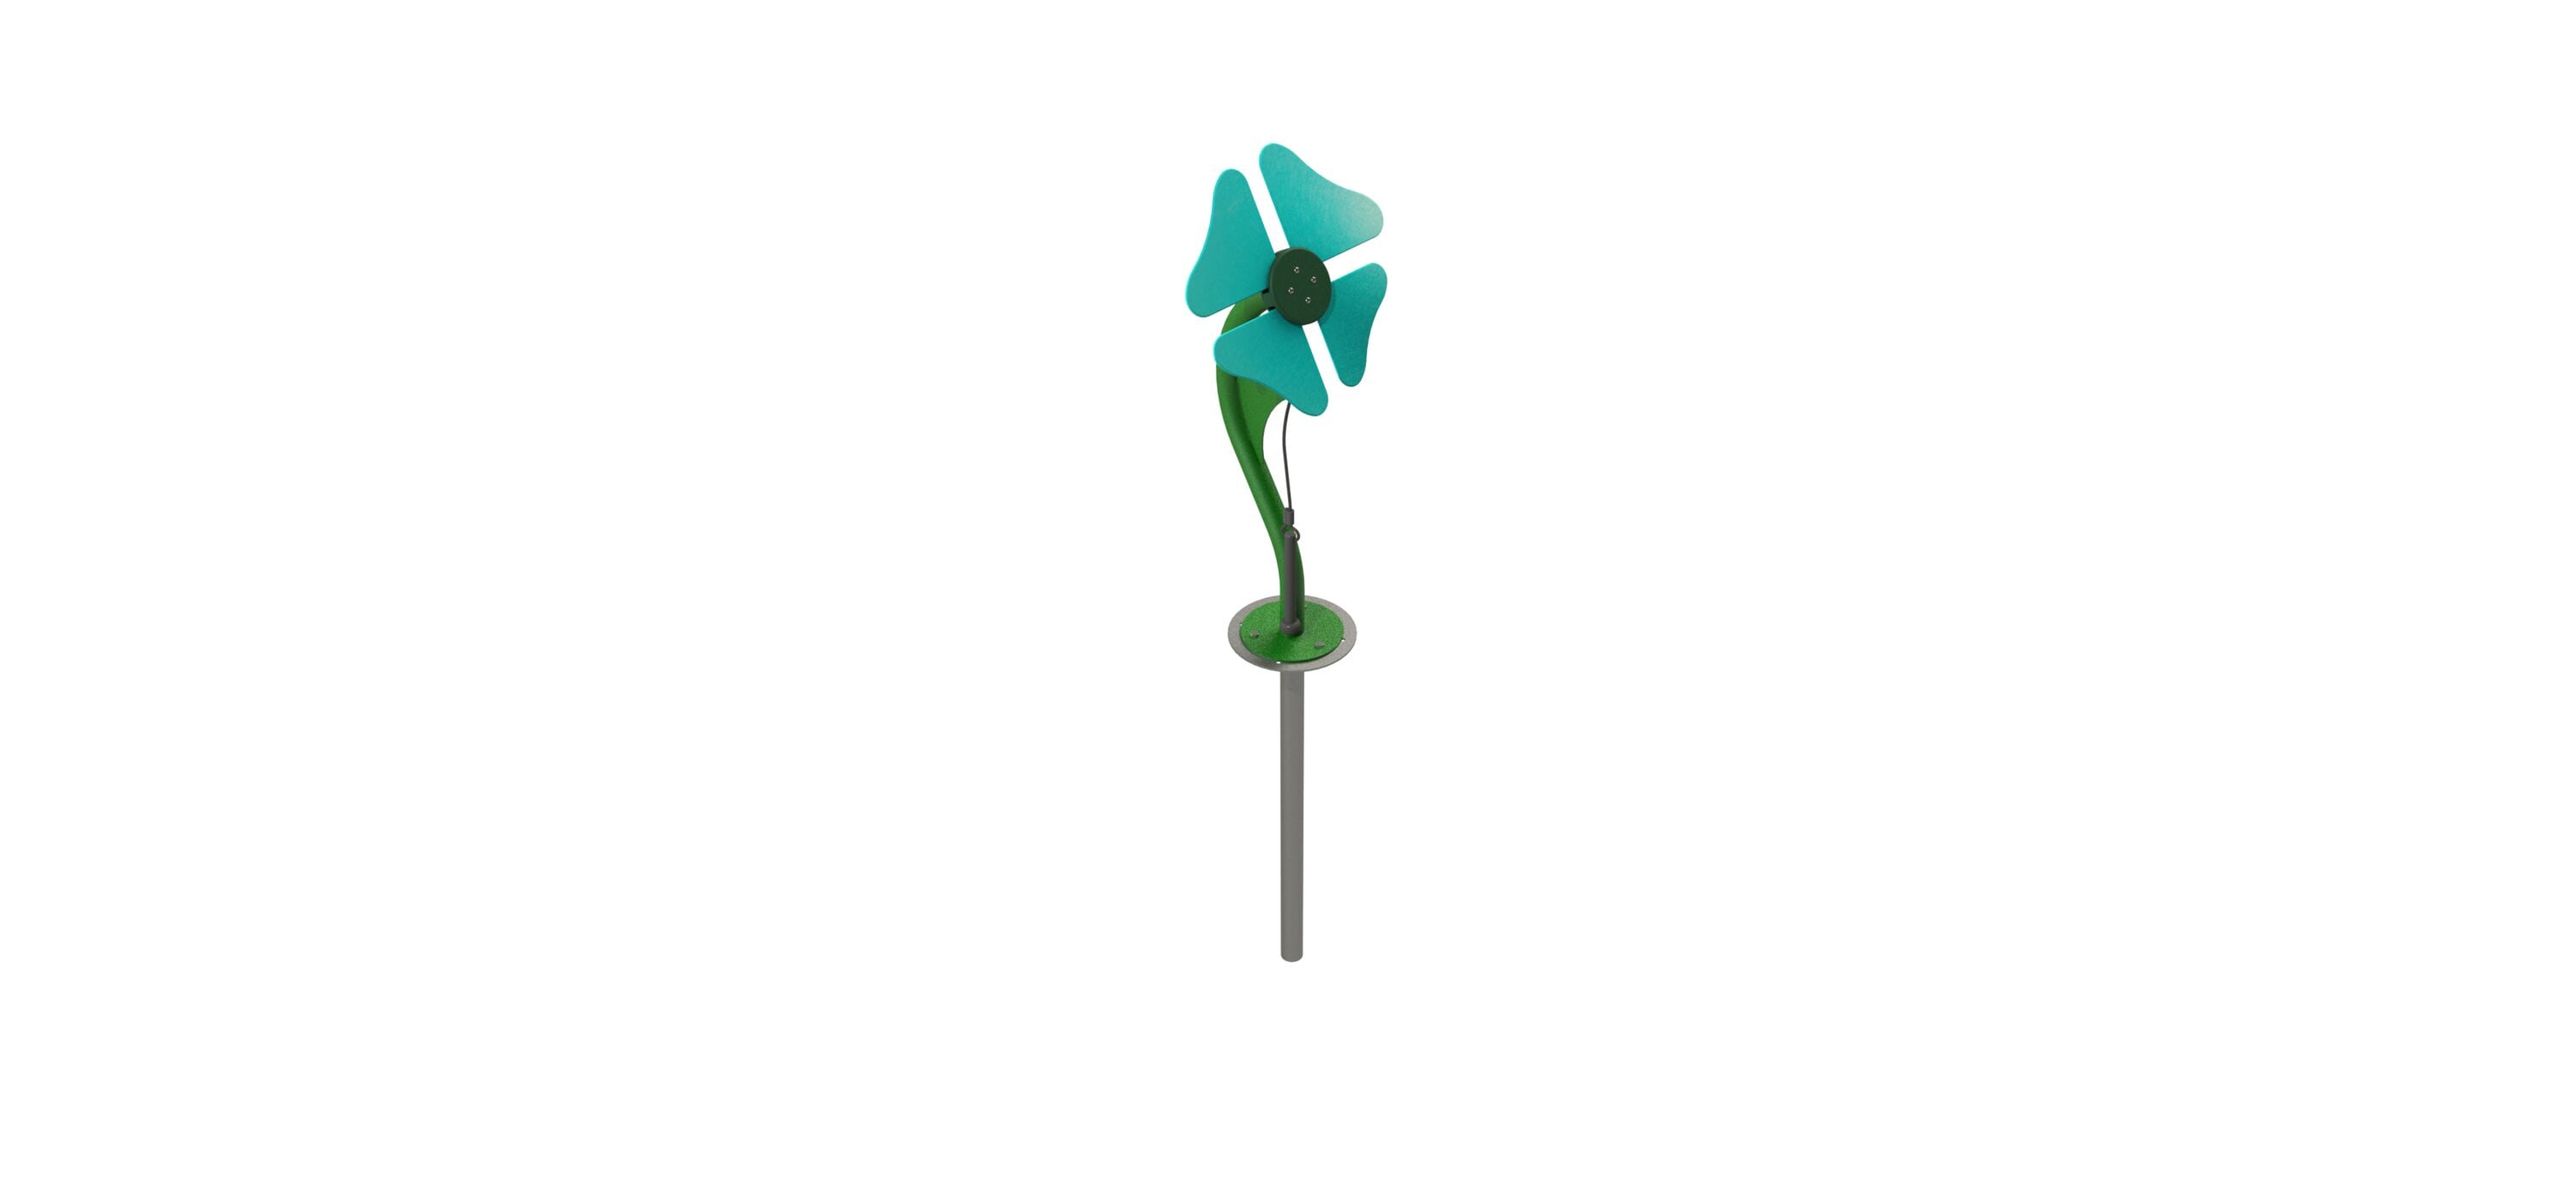 Turquoise Flower Plastic Playset - Musical Sound Garden with Anodized Aluminum Notes - C Major Diatonic - Alto/Soprano Range | - UltraPlay FWR-T-IG